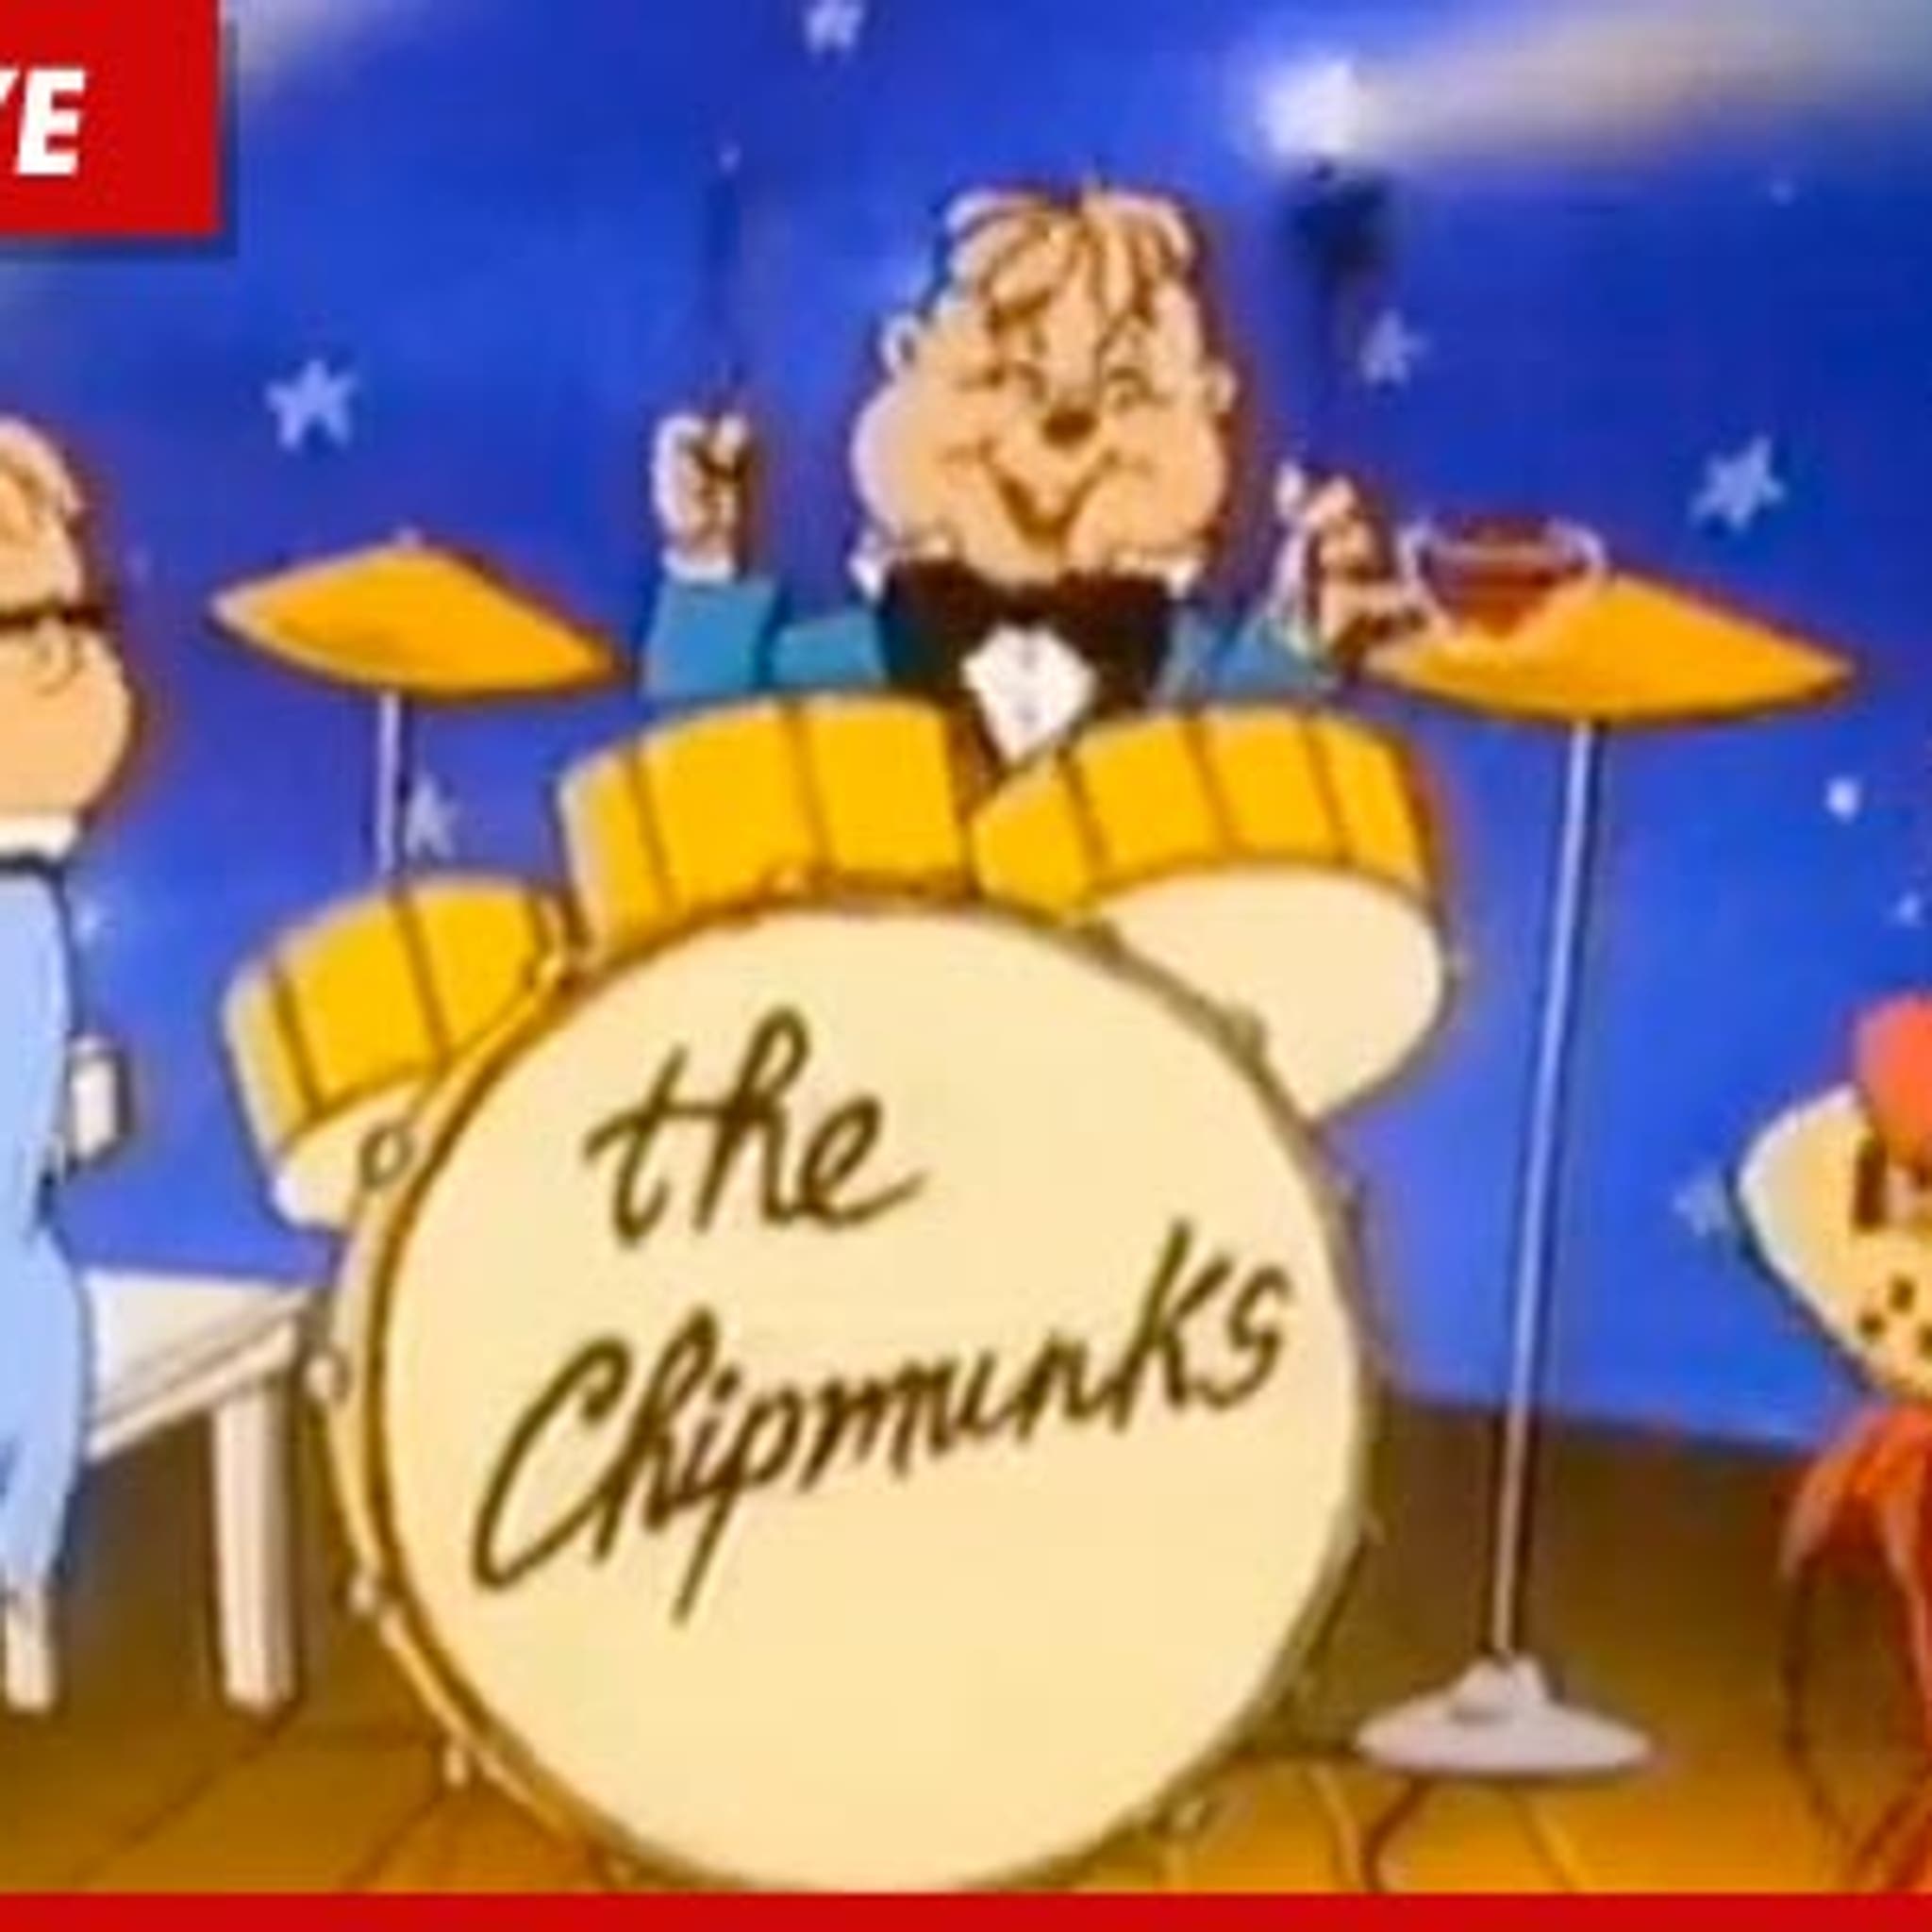 Alvin & the Chipmunks Lawsuit -- Creator Sues Capitol Records for Royalties